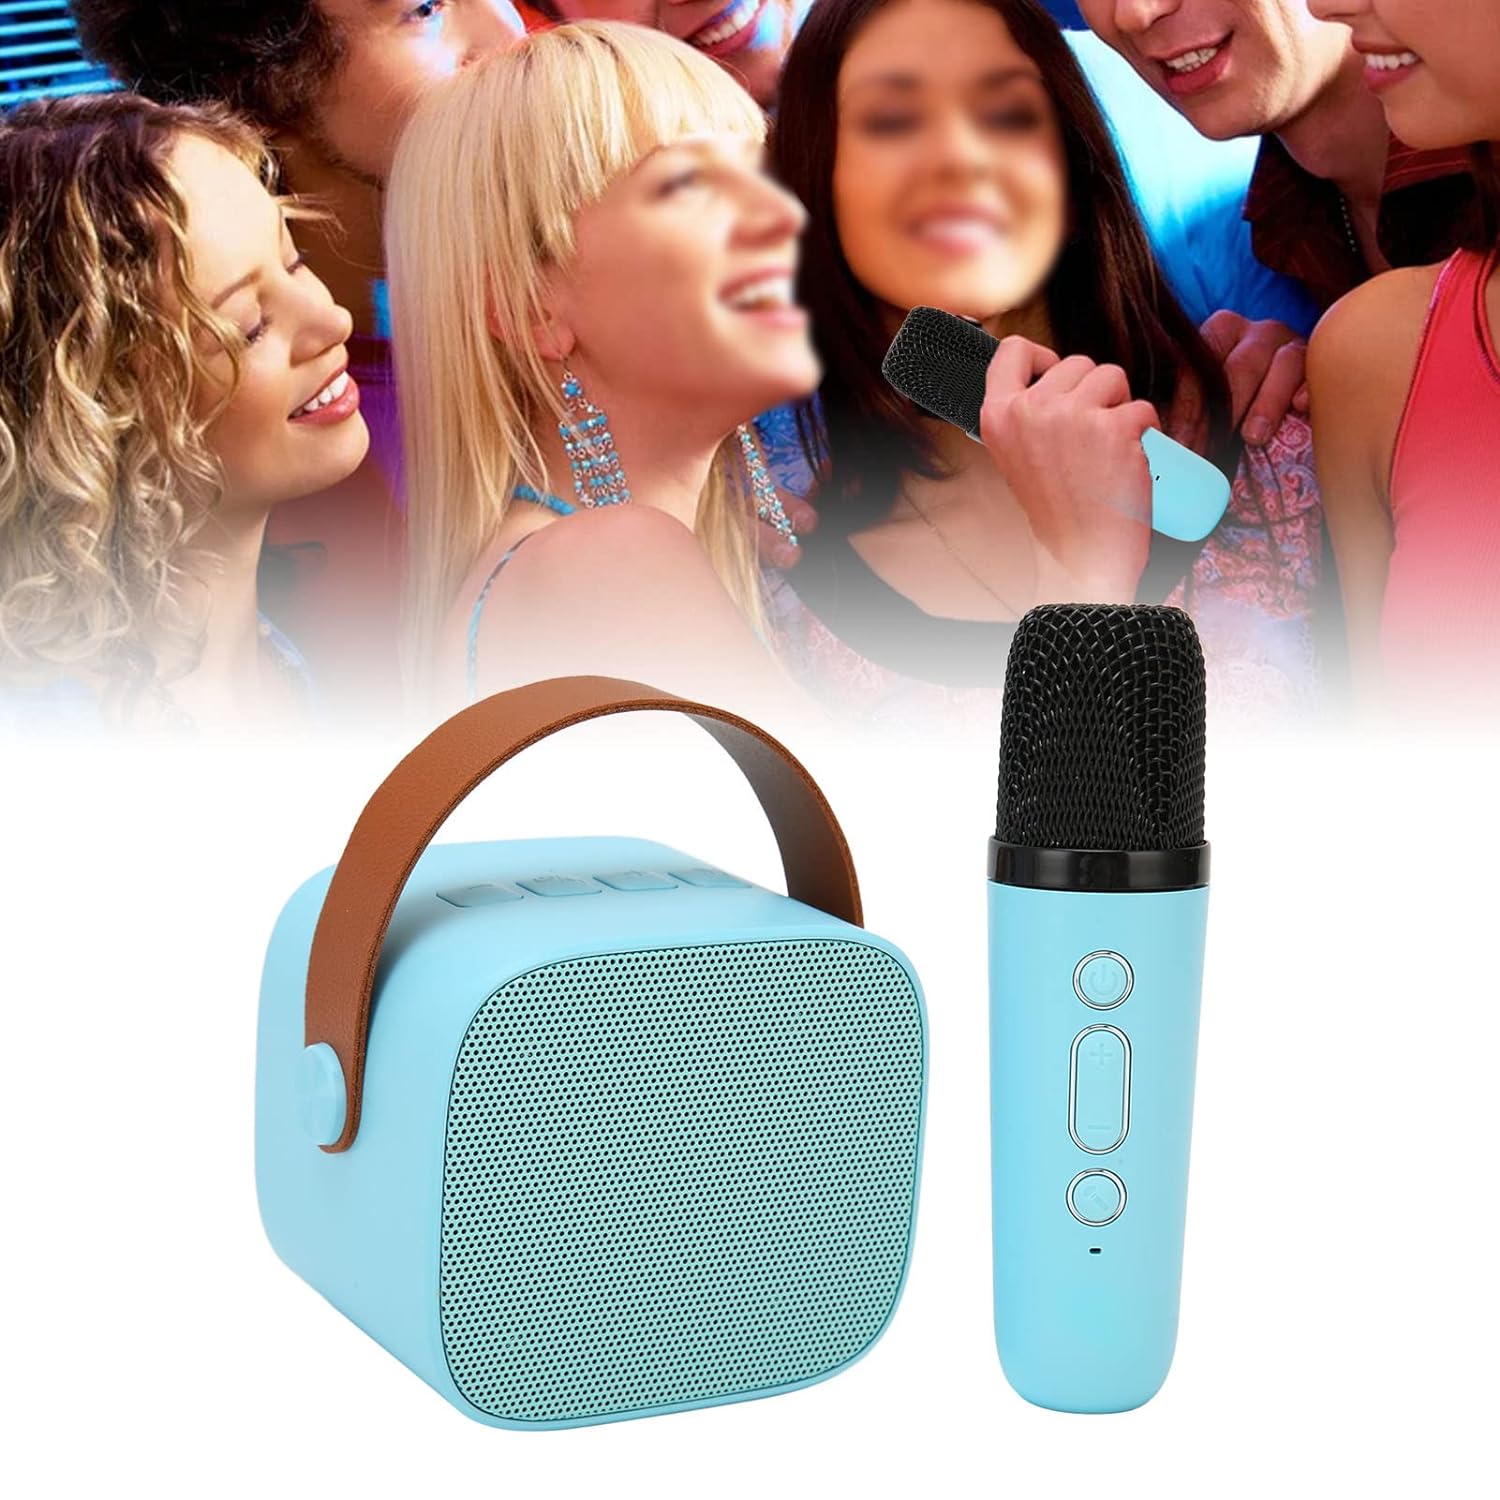 Yoidesu Karaoke Machine for Kids, Portable Bluetooth Speaker with Wireless Microphone for Kids Adults, Karaoke Toys, Gifts for Girls Age 4 5 6 7 8 9 10 12 Years Old or (Blue)